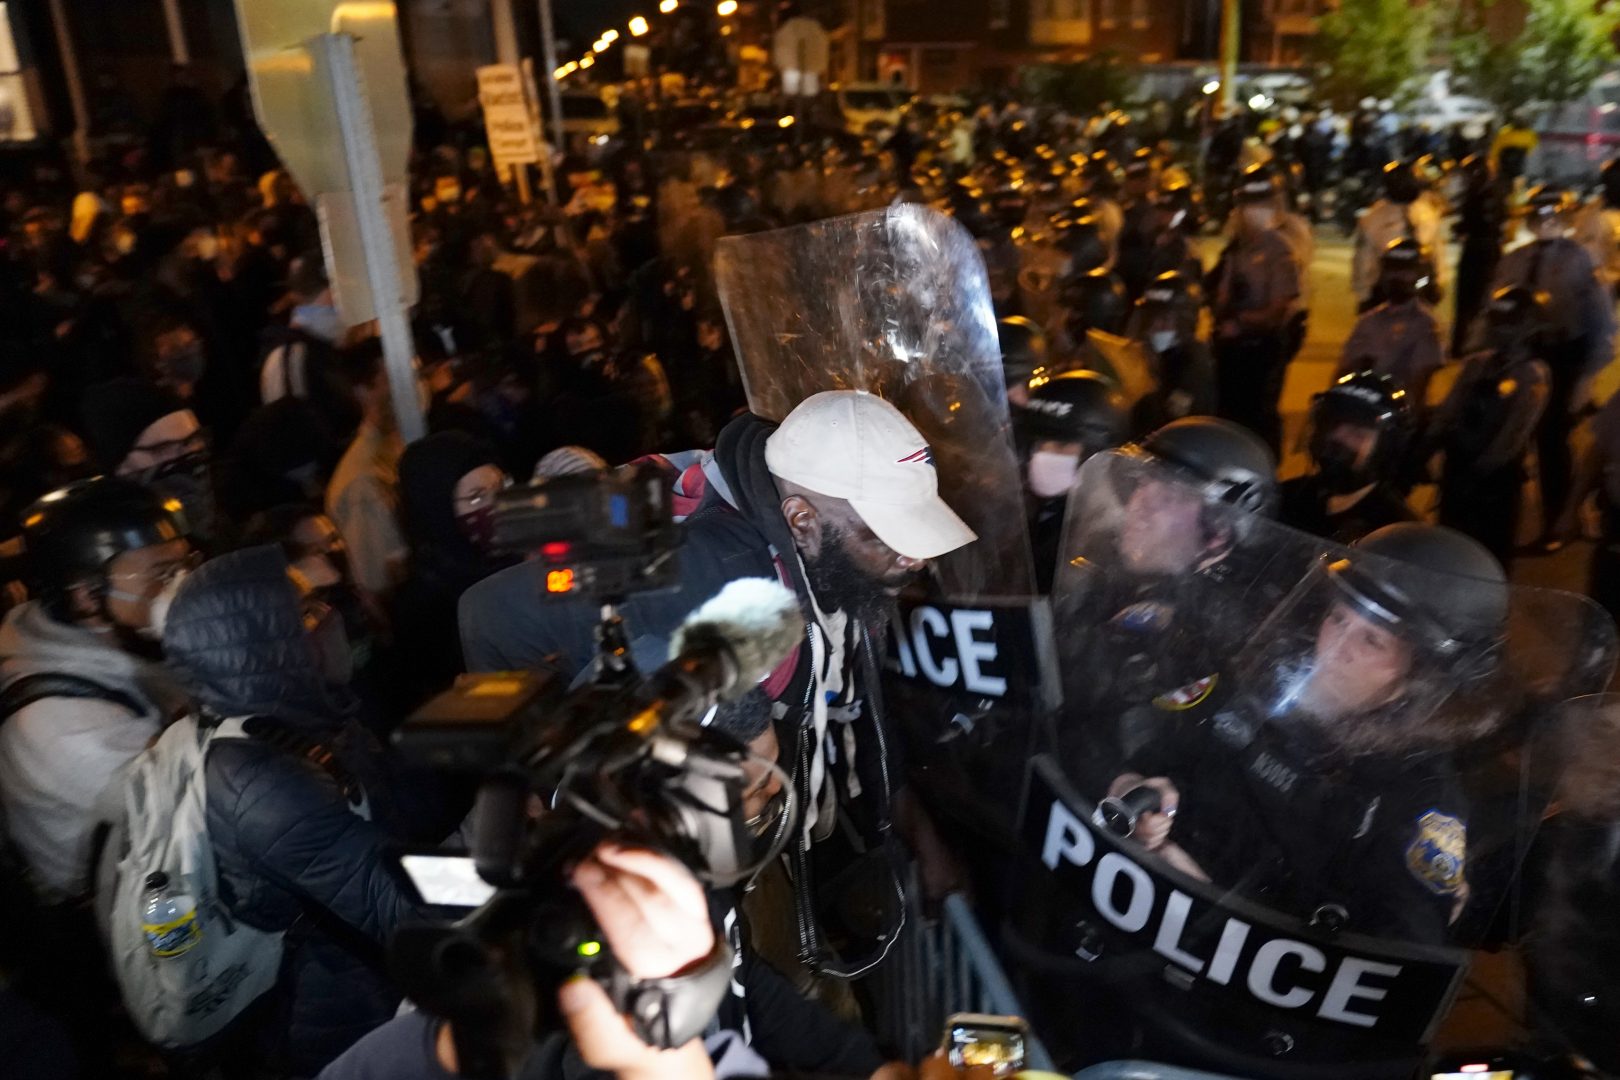 A protester confronts police during a march Tuesday Oct. 27, 2020 in Philadelphia. 